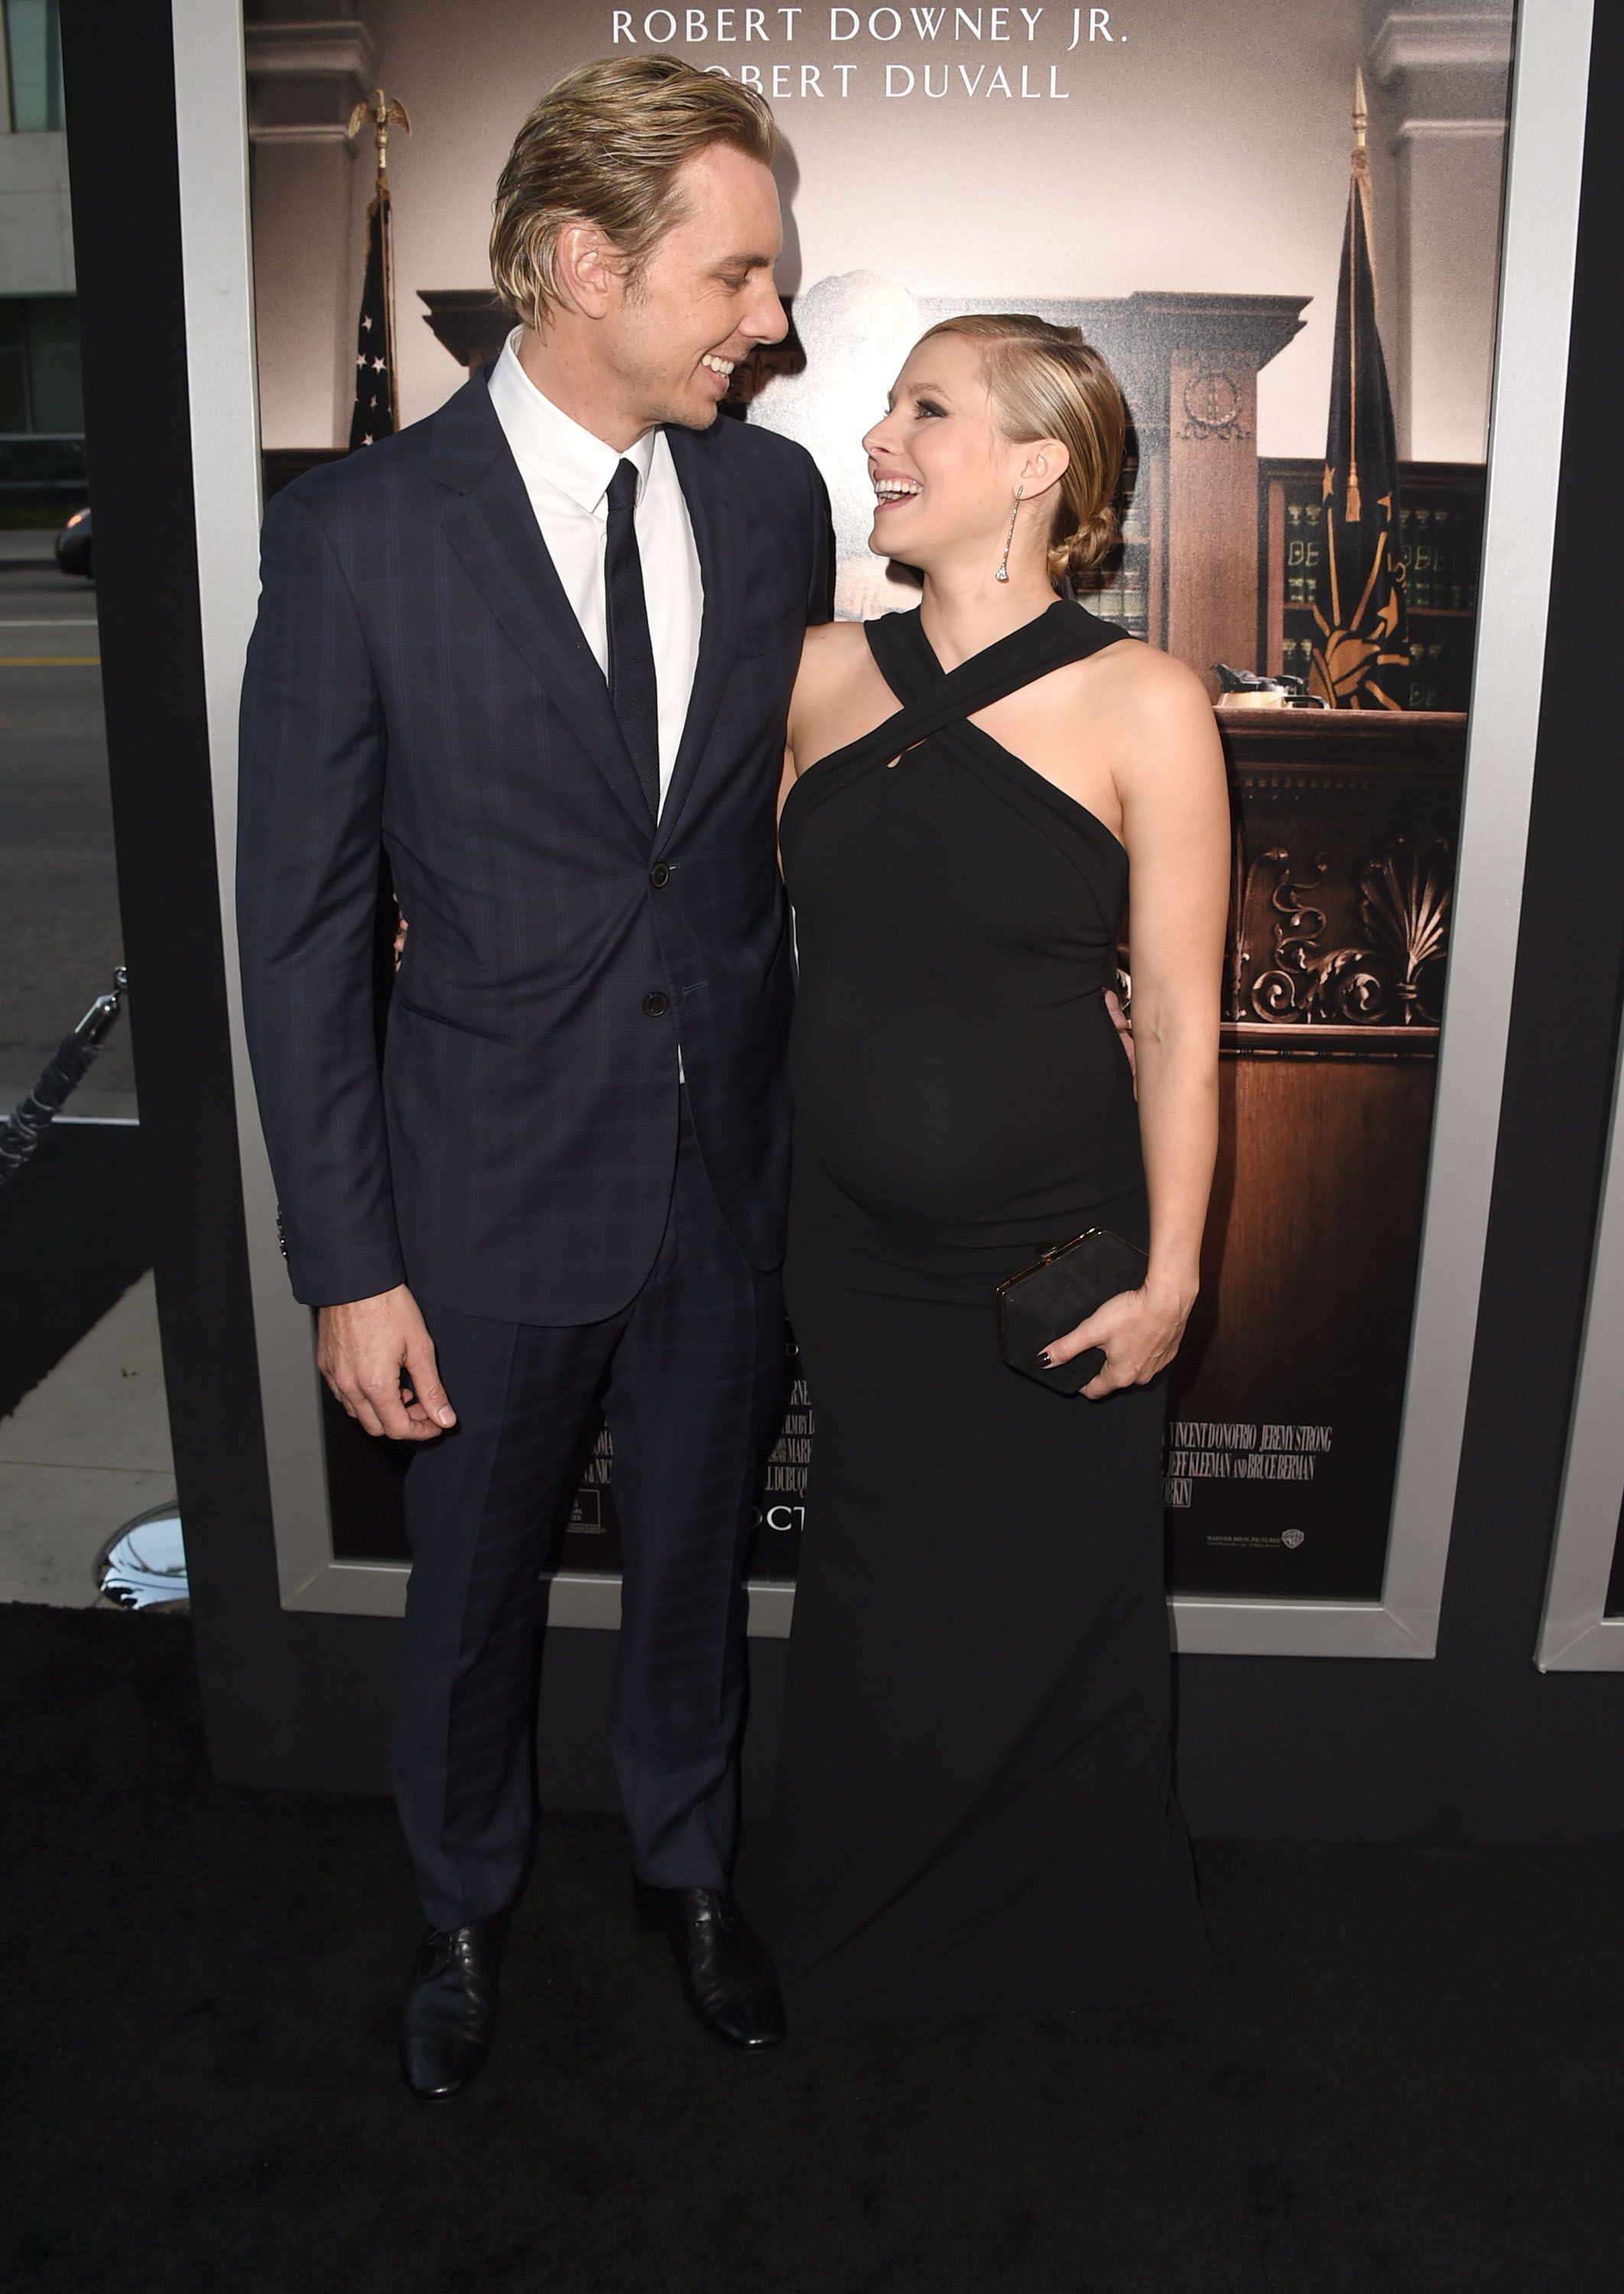 Kristen Bell and Dax Shepard's Relationship Timeline